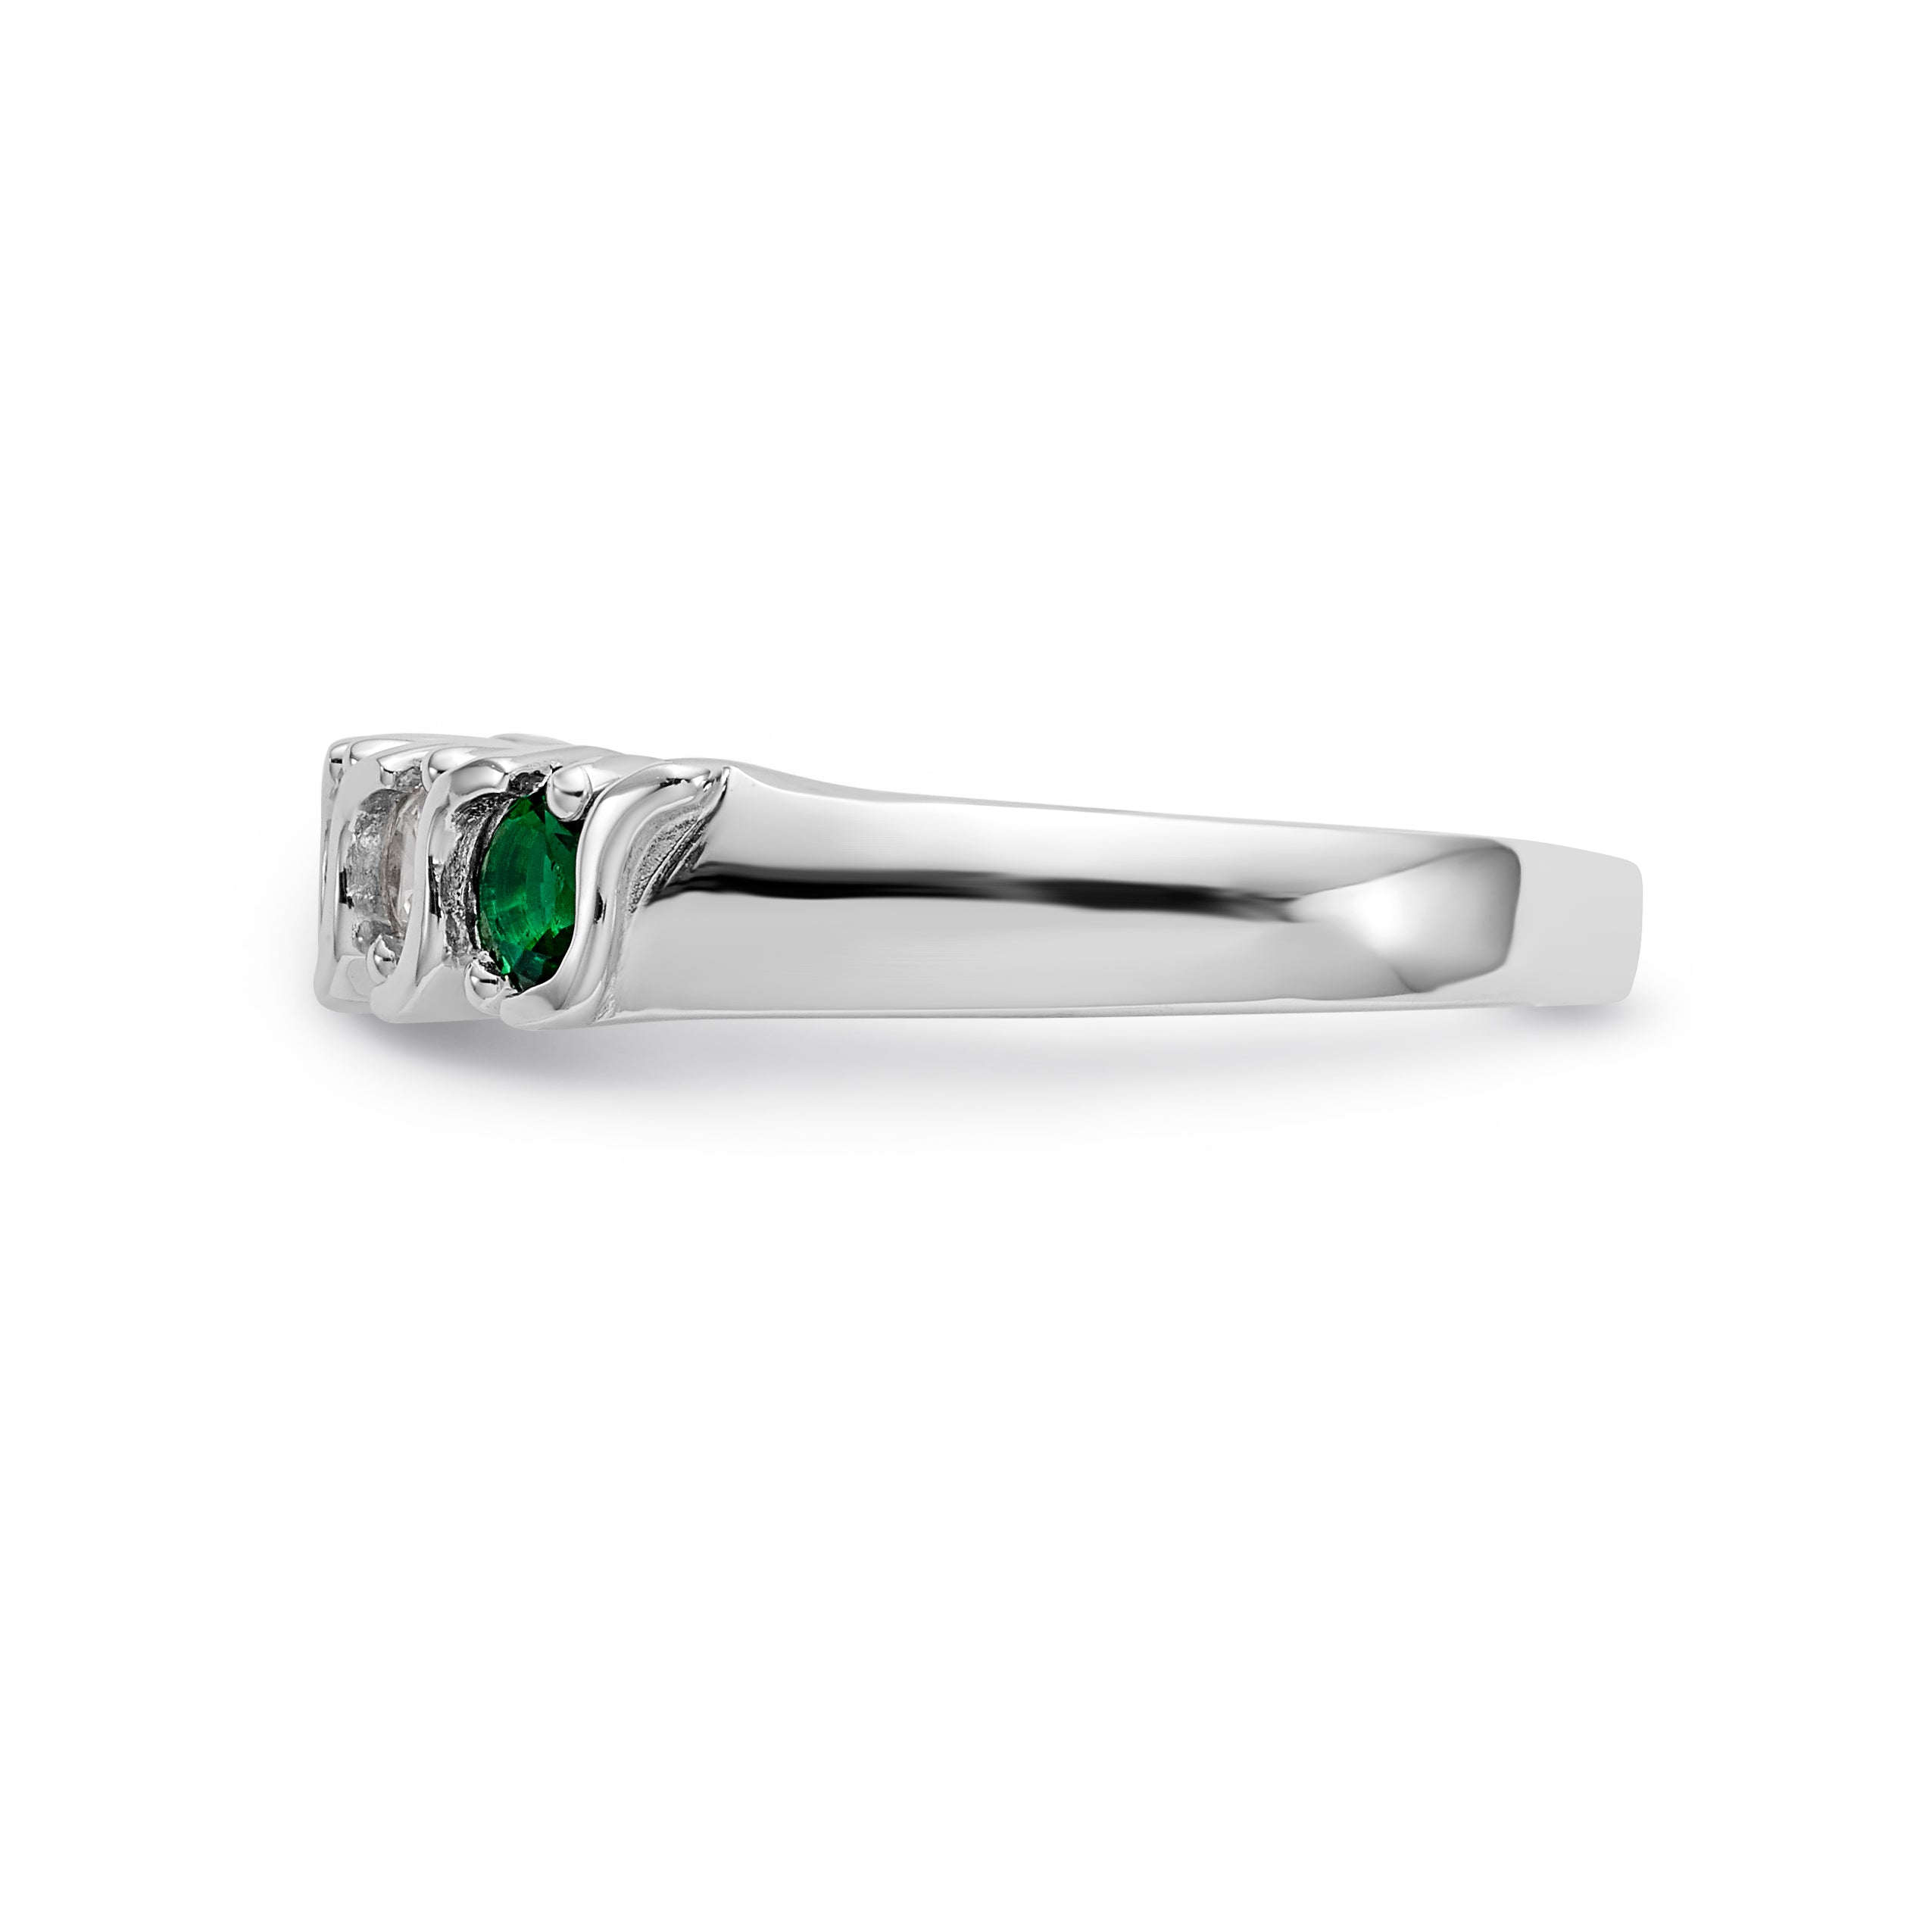 14K White Gold 1/3 carat Diamond and Emerald Complete Band